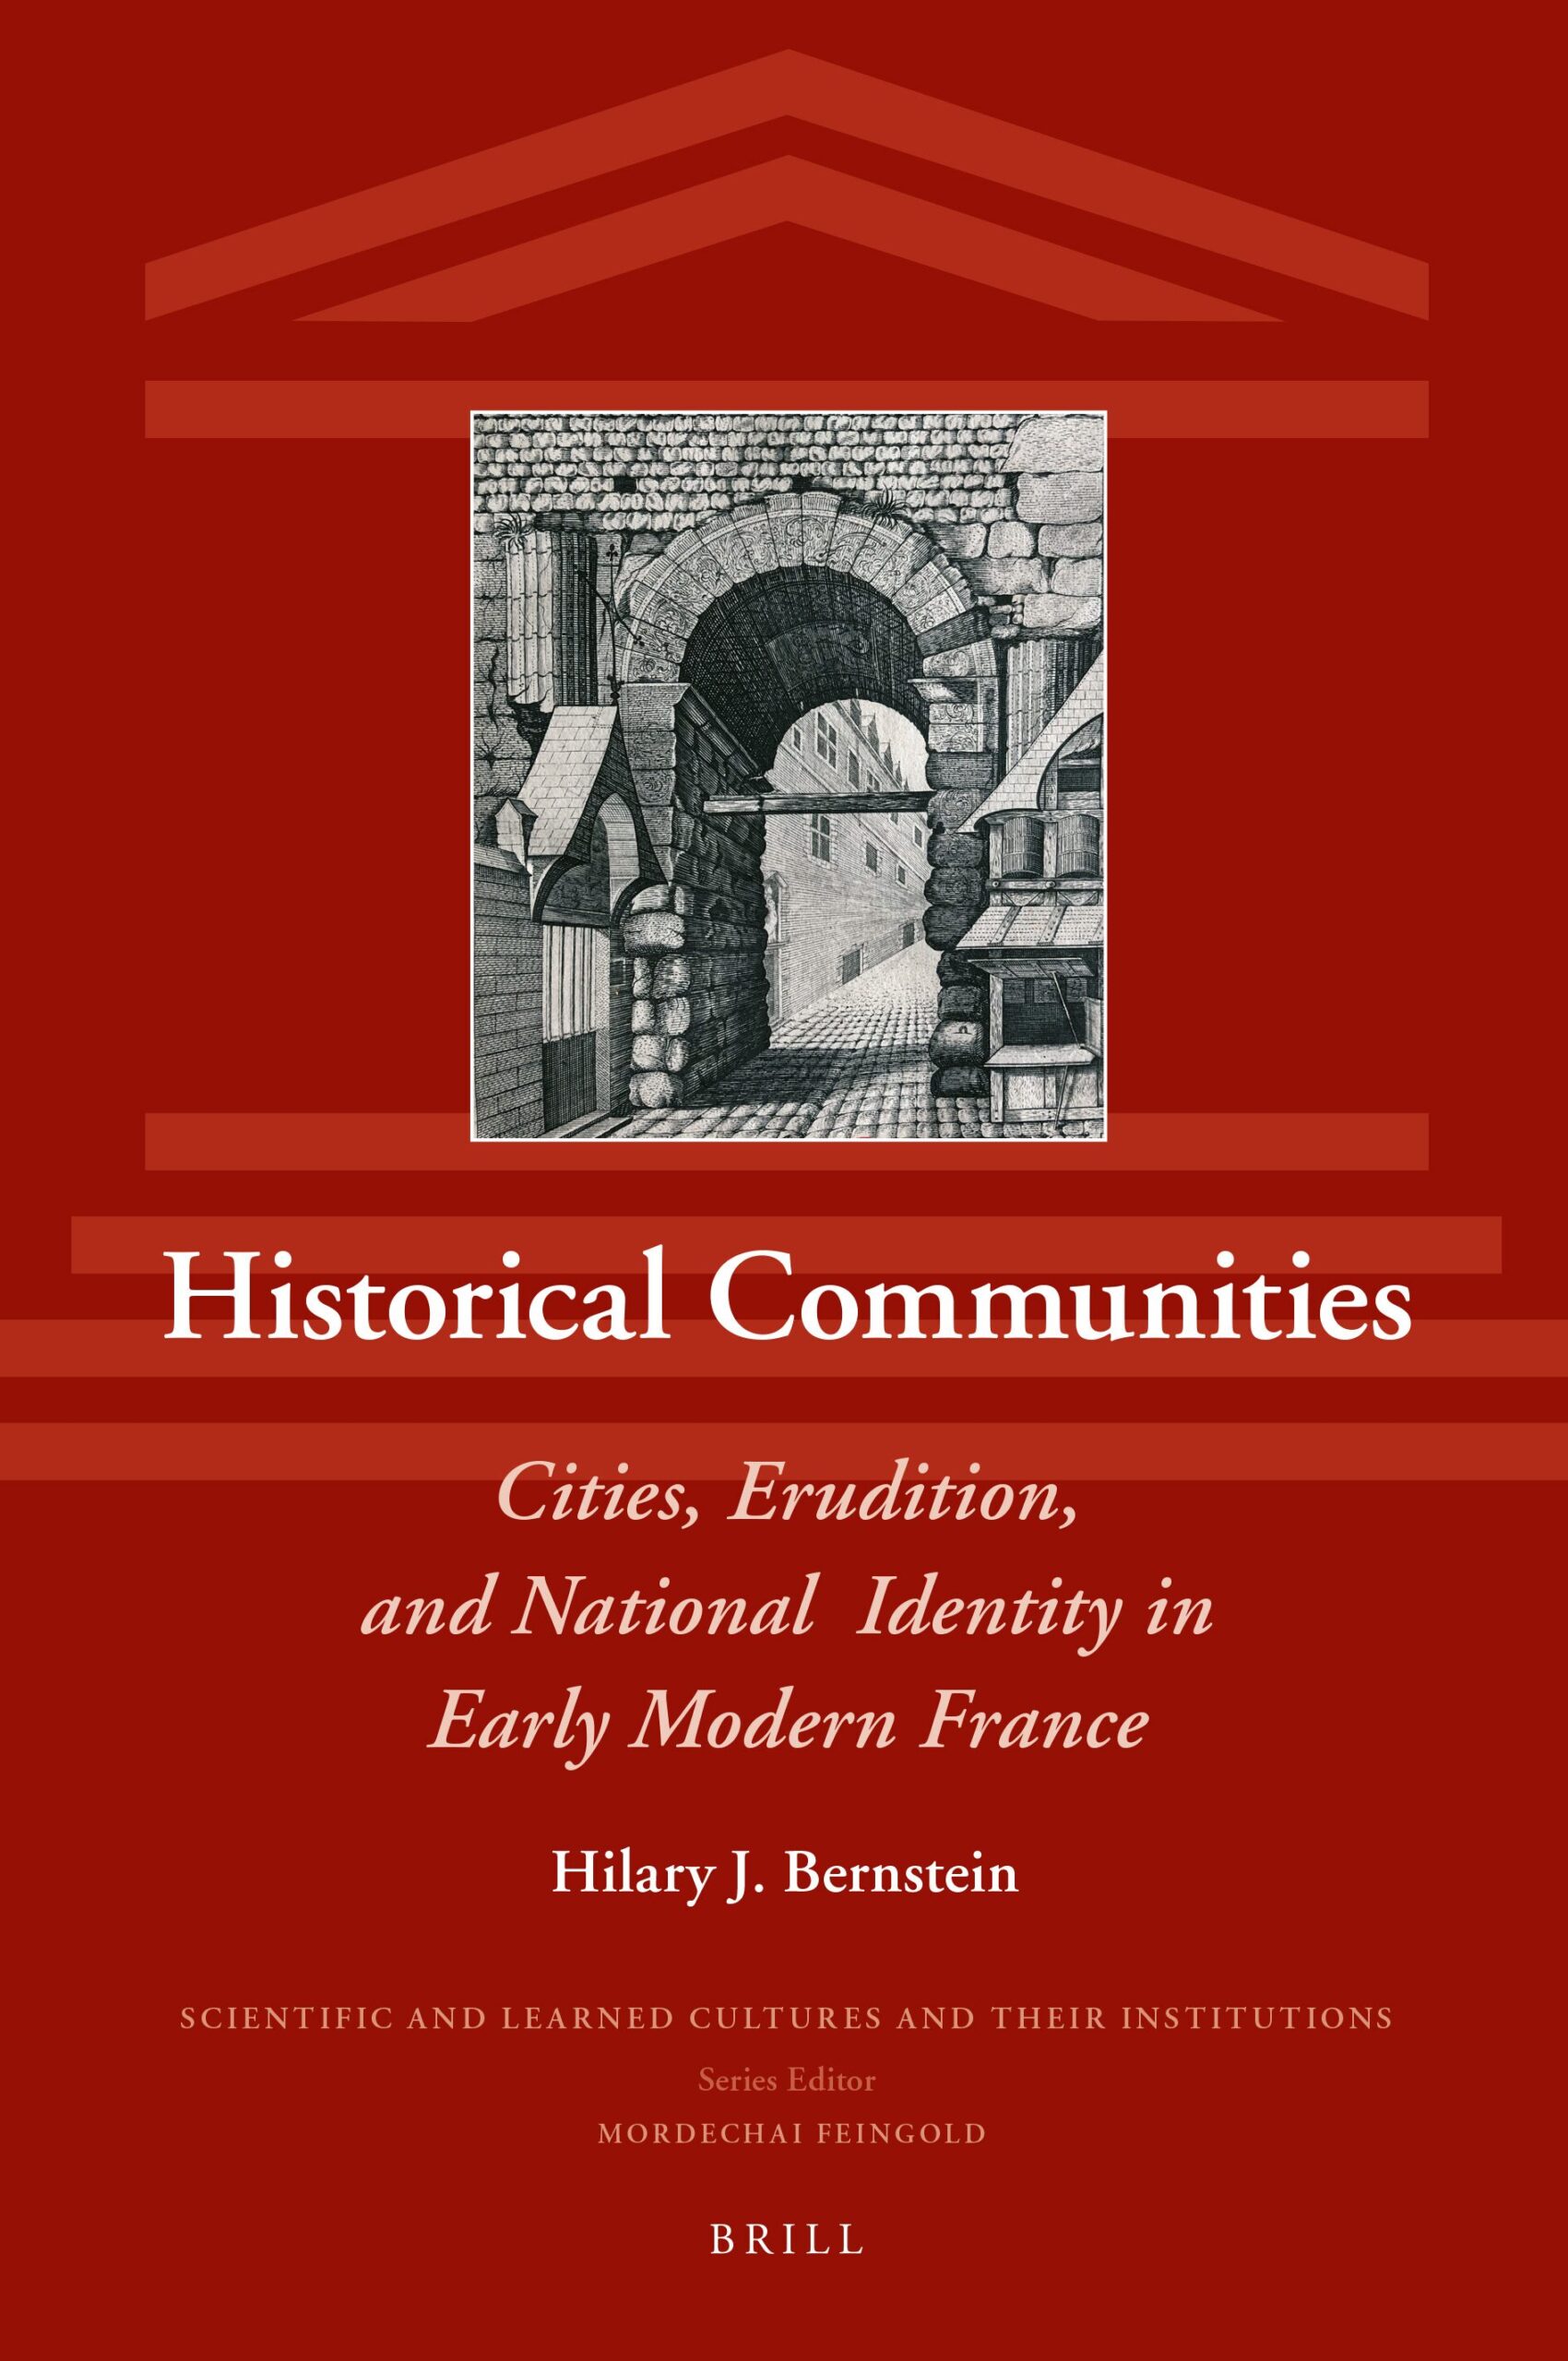 Book cover for 'Historical Communities: Cities, Erudition, and National Identity in Early Modern France' by Hilary J. Bernstein